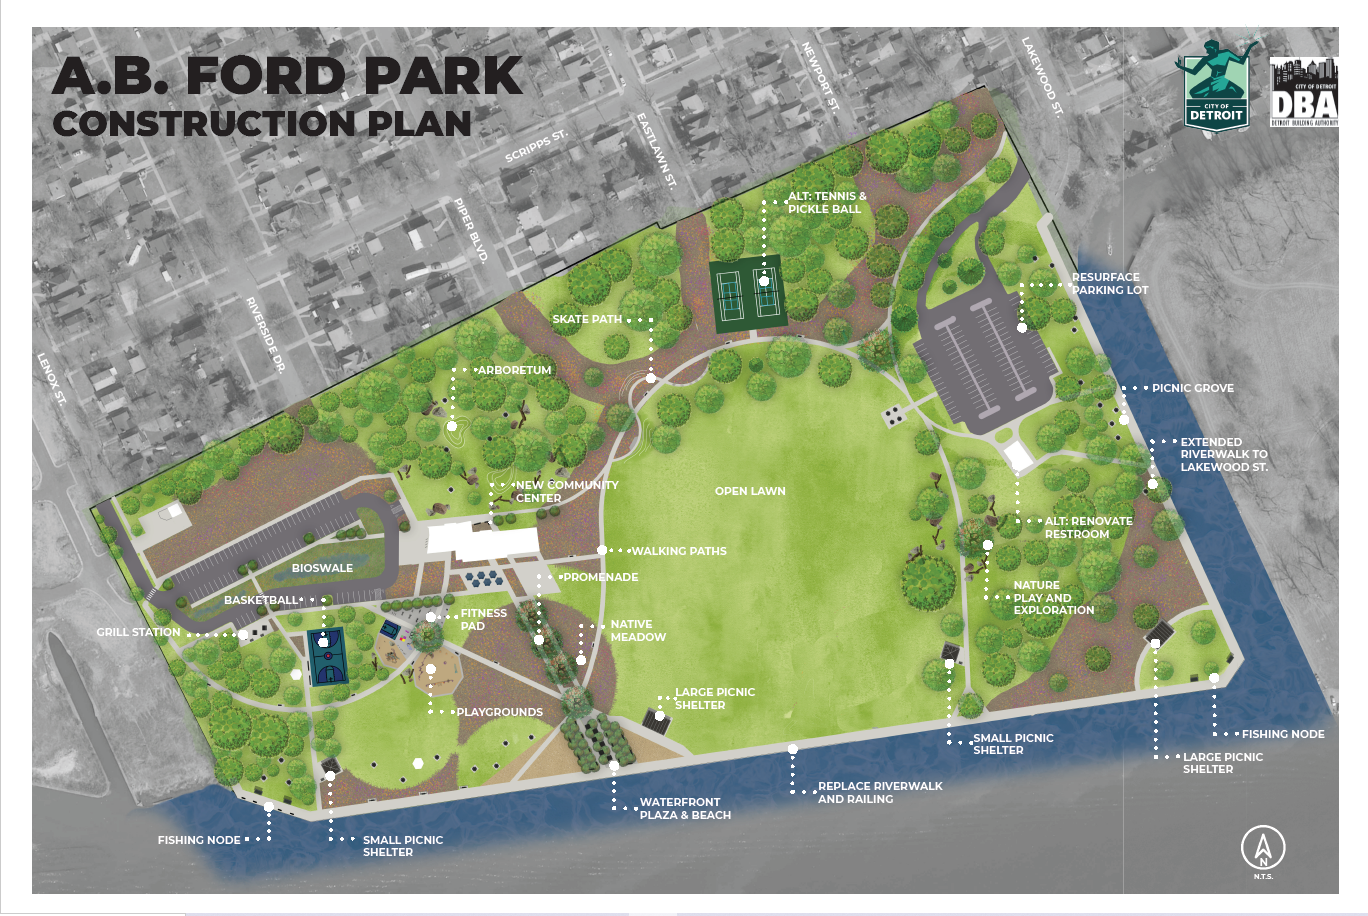 Park improvements to AB Ford Park